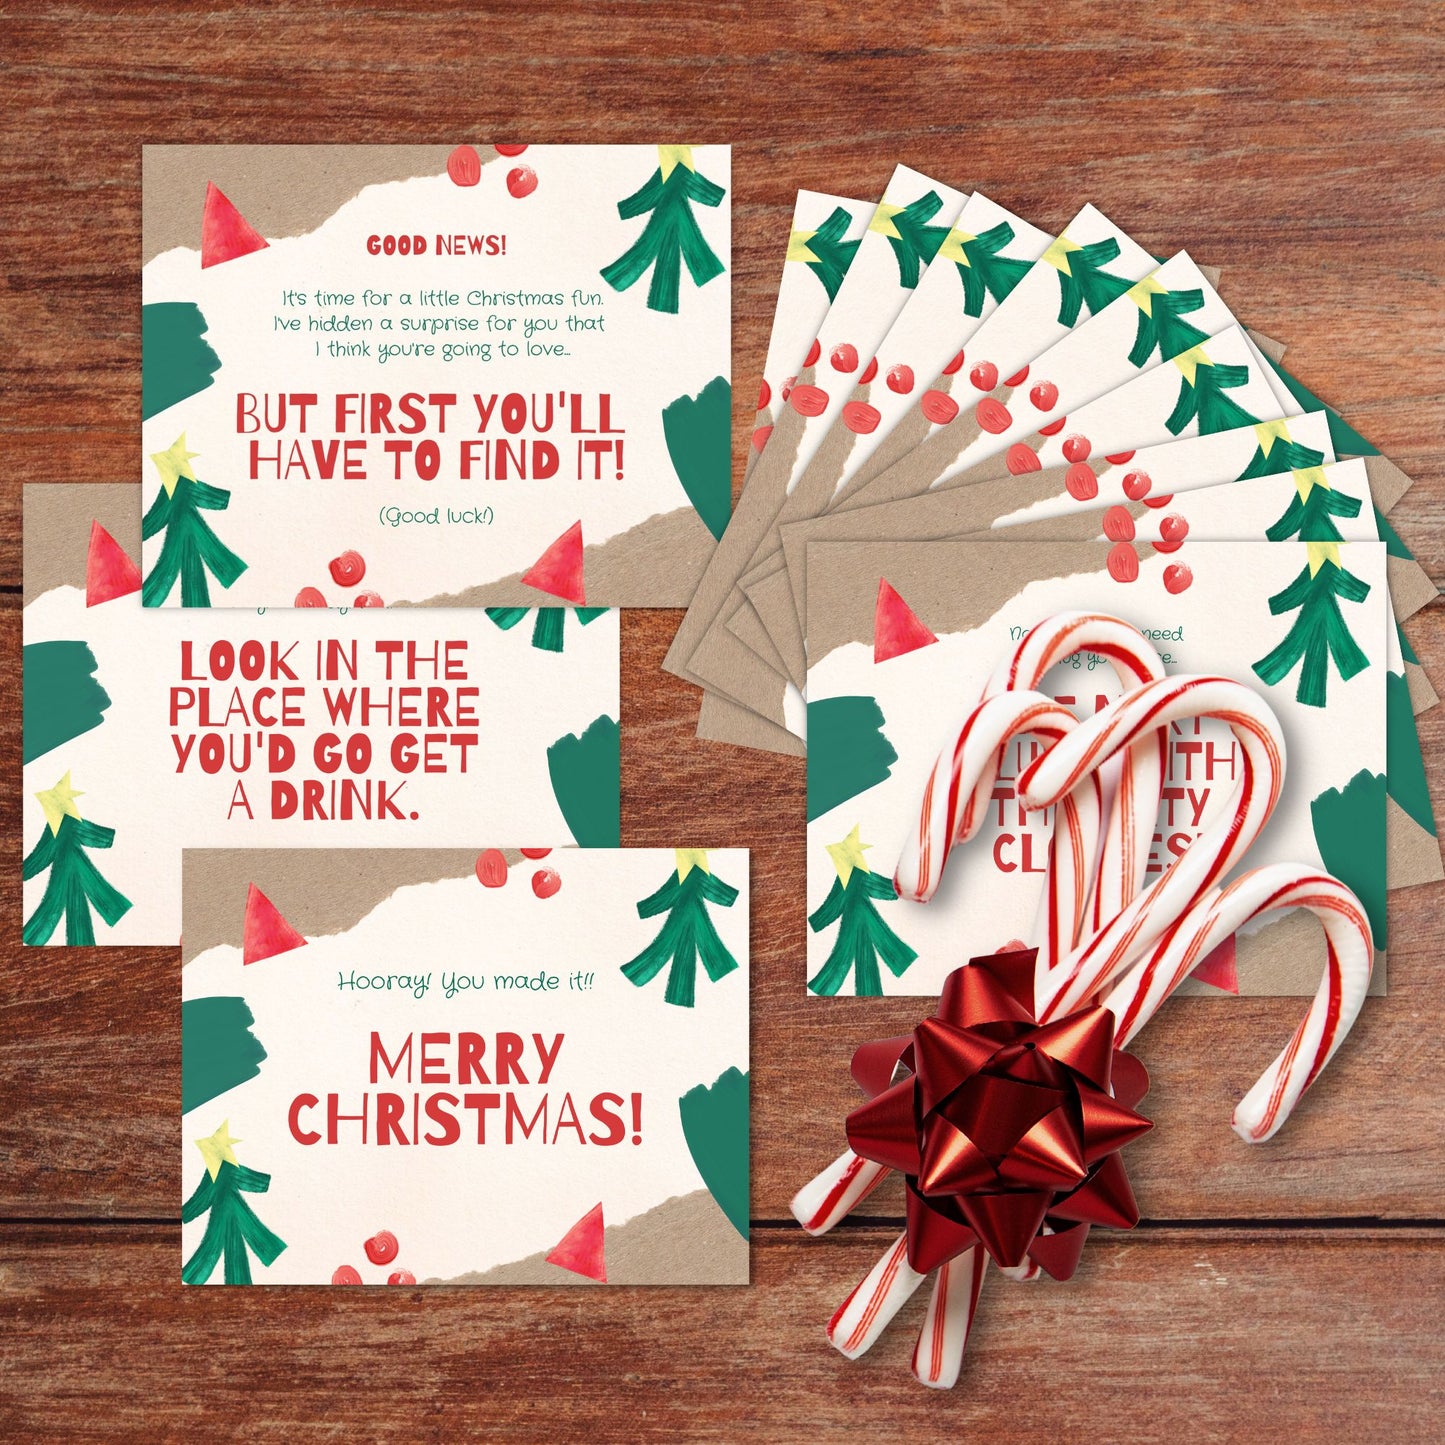 Classic Christmas Treasure Hunt clue cards are displayed with candy canes on a table top